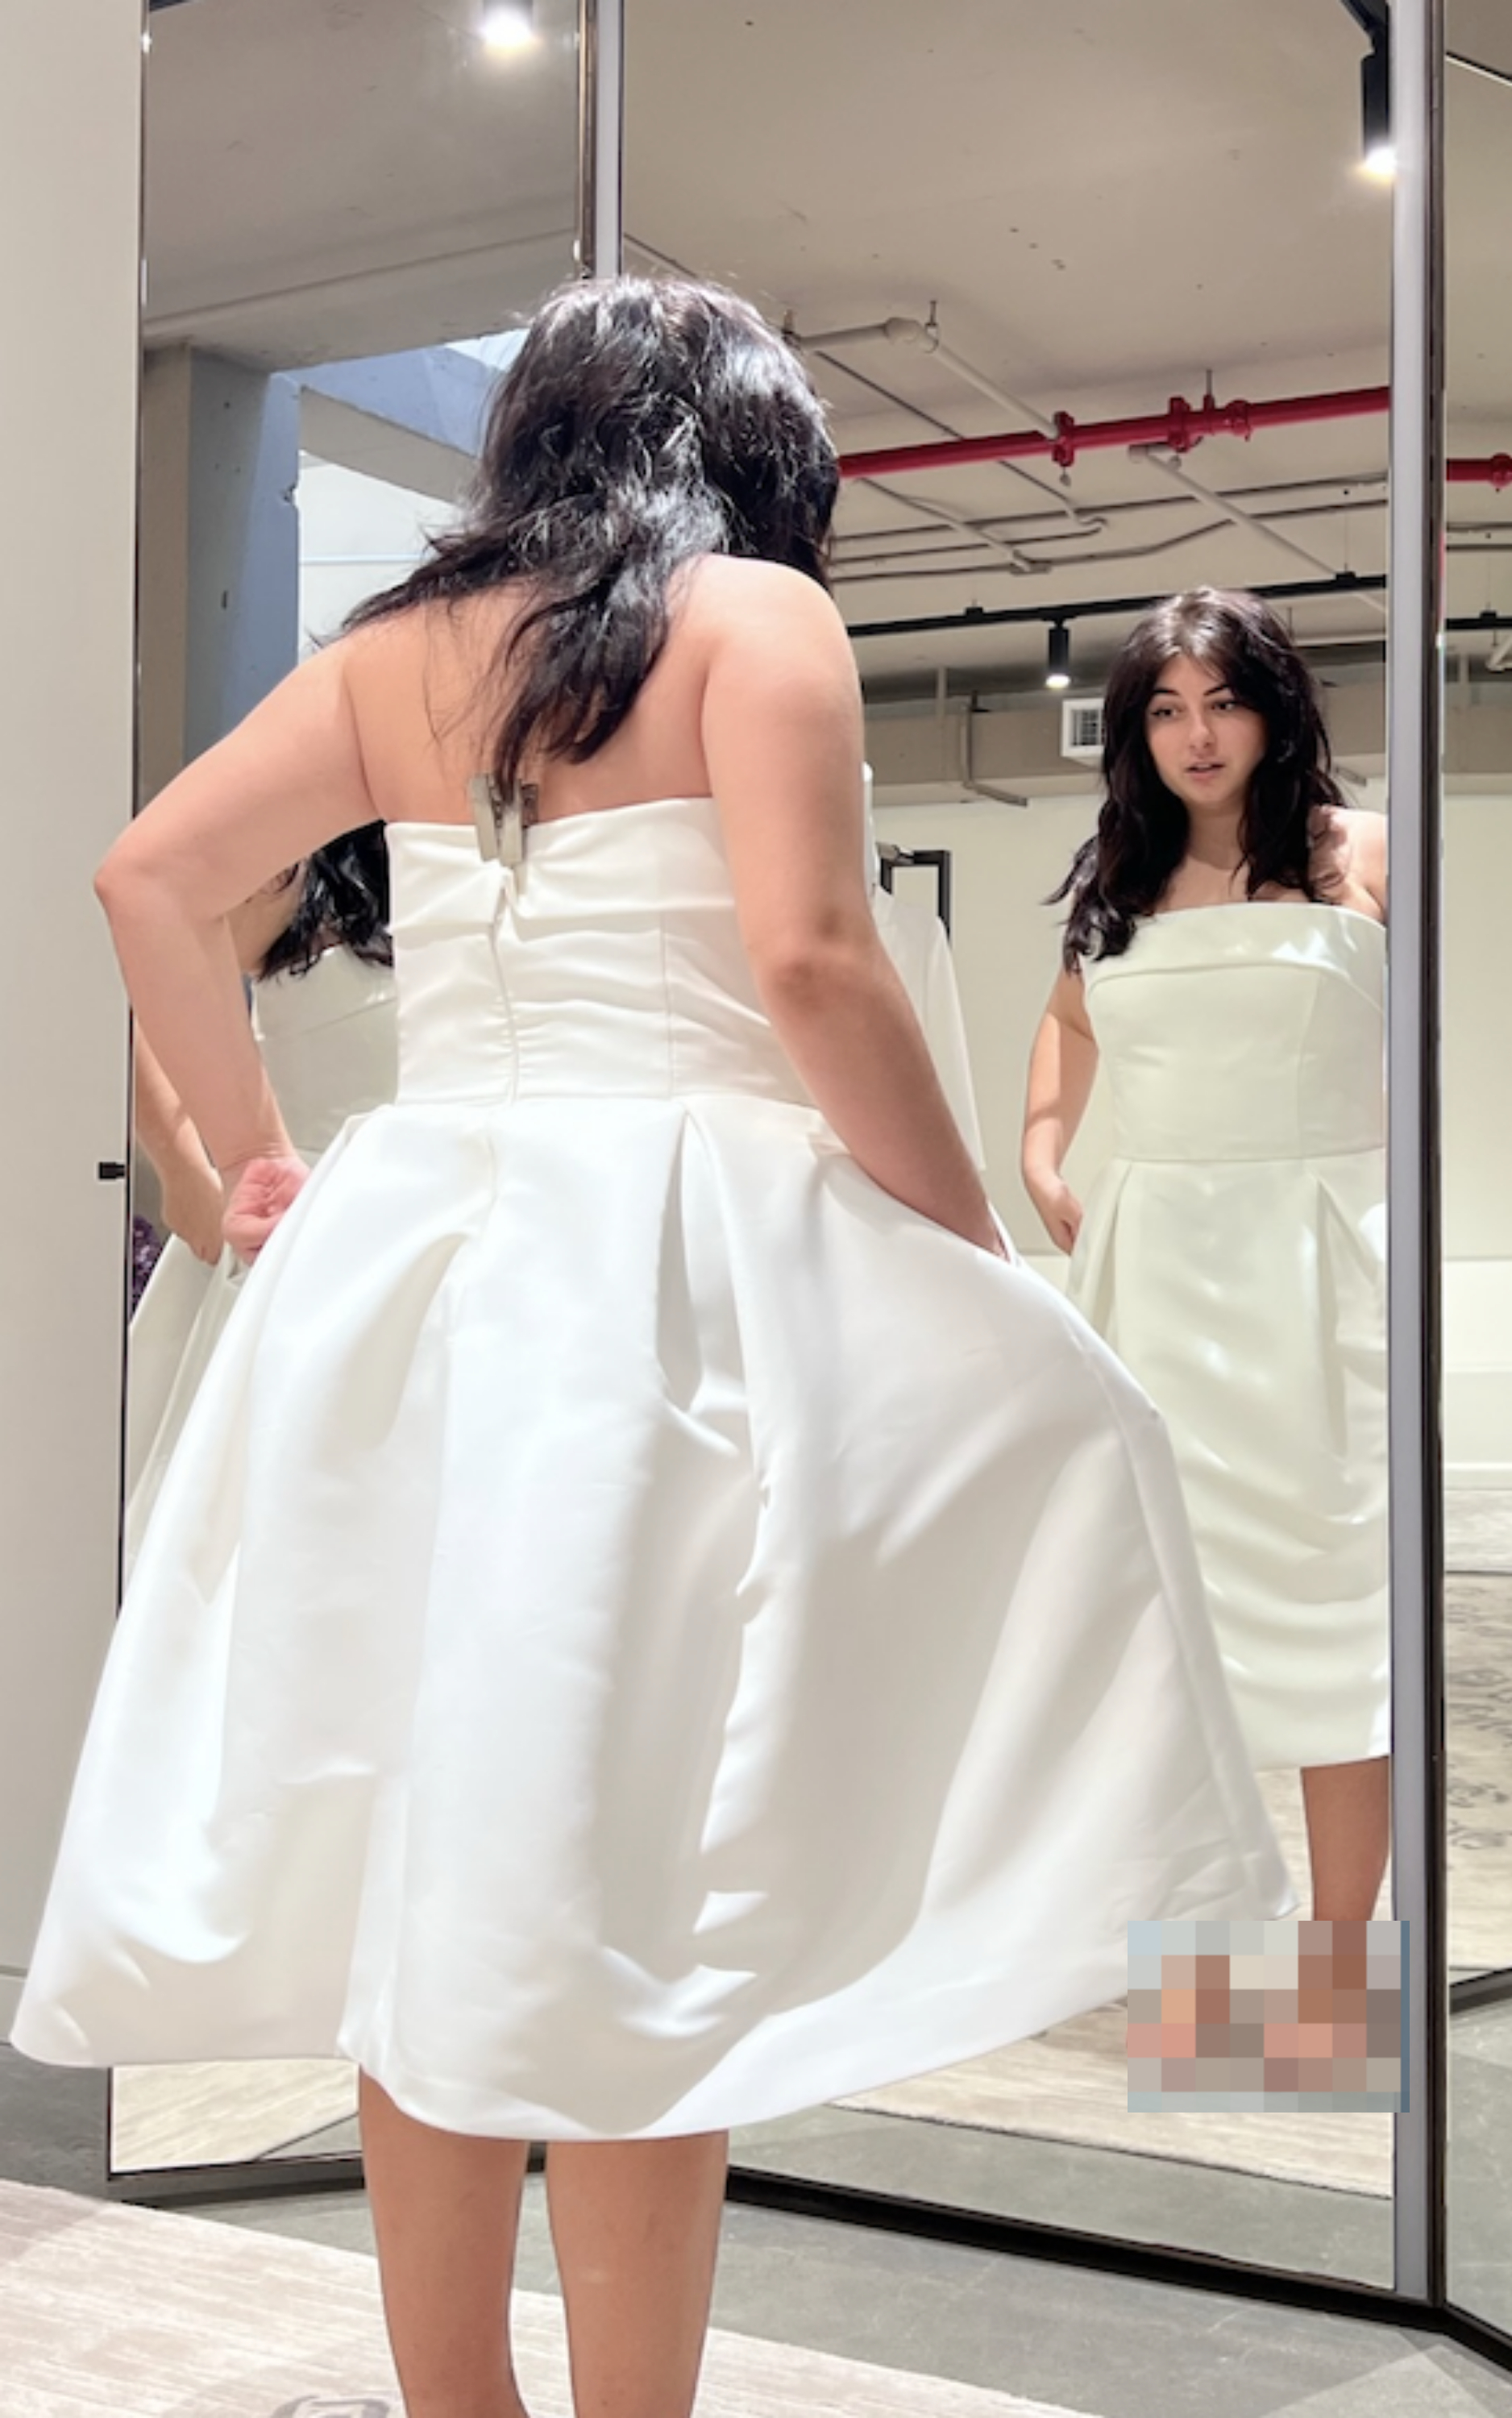 Woman in white dress examines her reflection in a full-length mirror